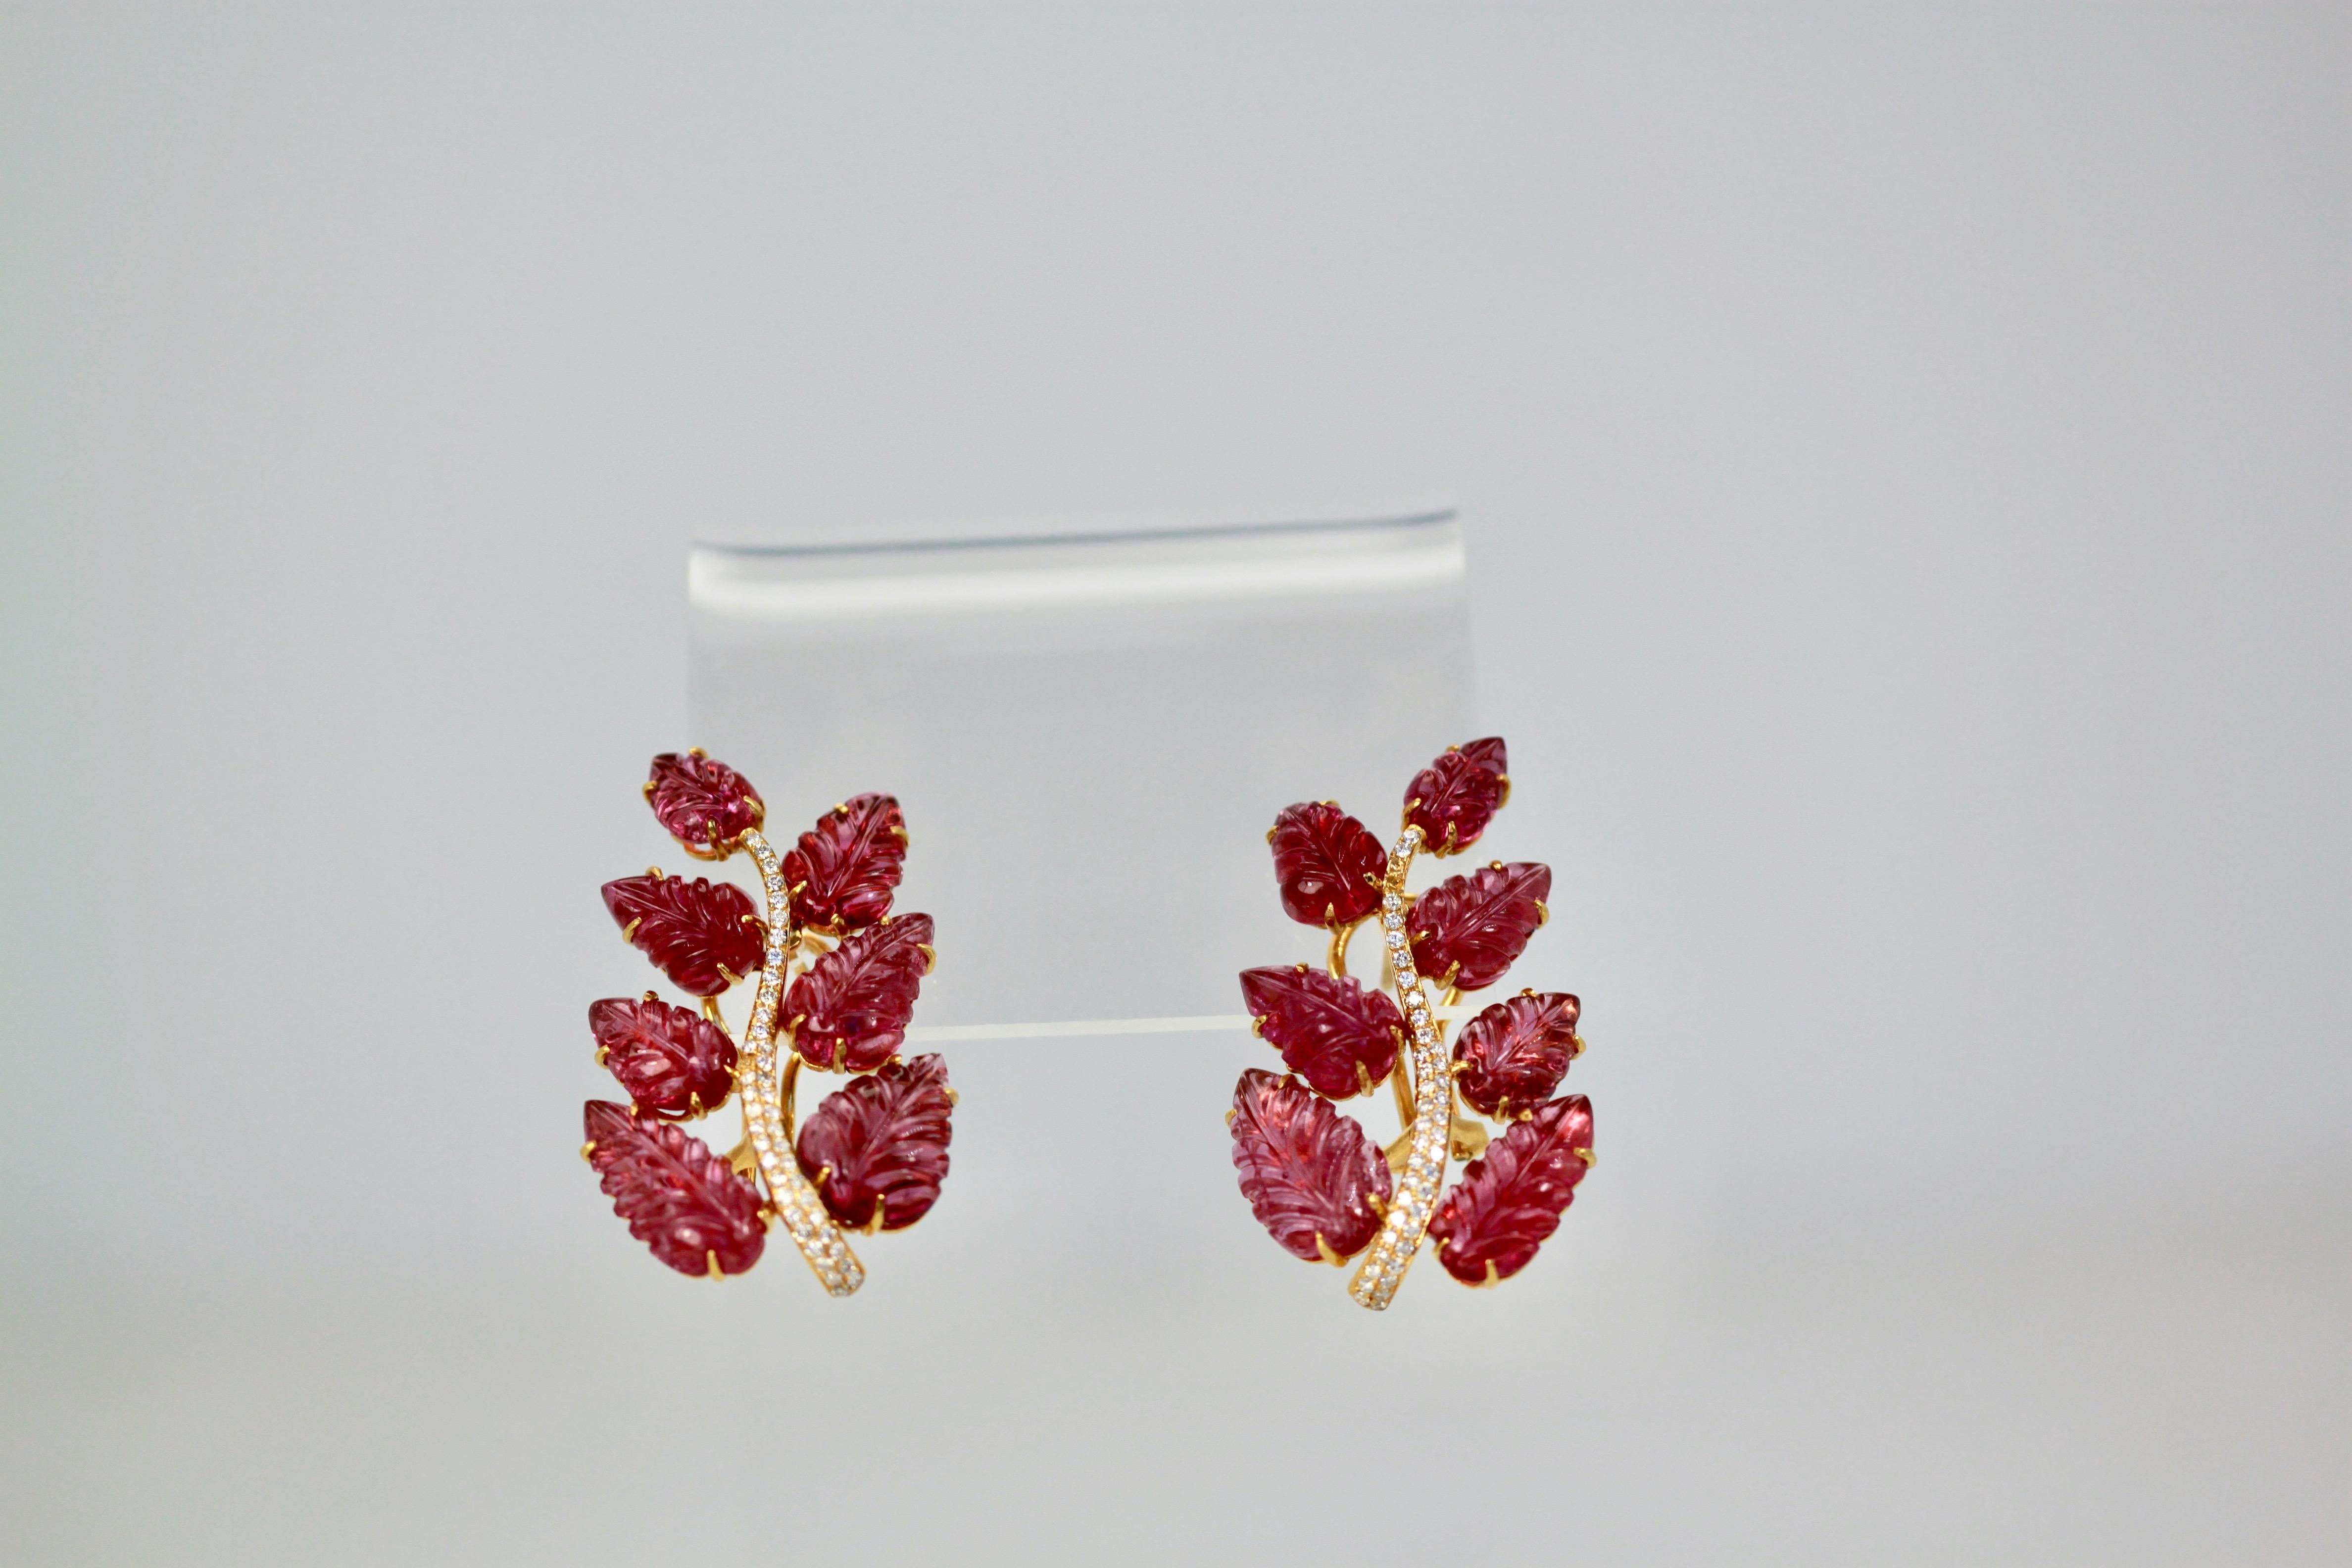 These Rubellite Carved leaf earrings are unique and lovely.  They are 4 cm long with 7 carved Rubellite gemstones each. They are large and distinctive. There are 2 Rubellites at 4 carats, 2 at 3 carats, 2 at 1 1/2 carats and 1 at 3/4 carat each. 